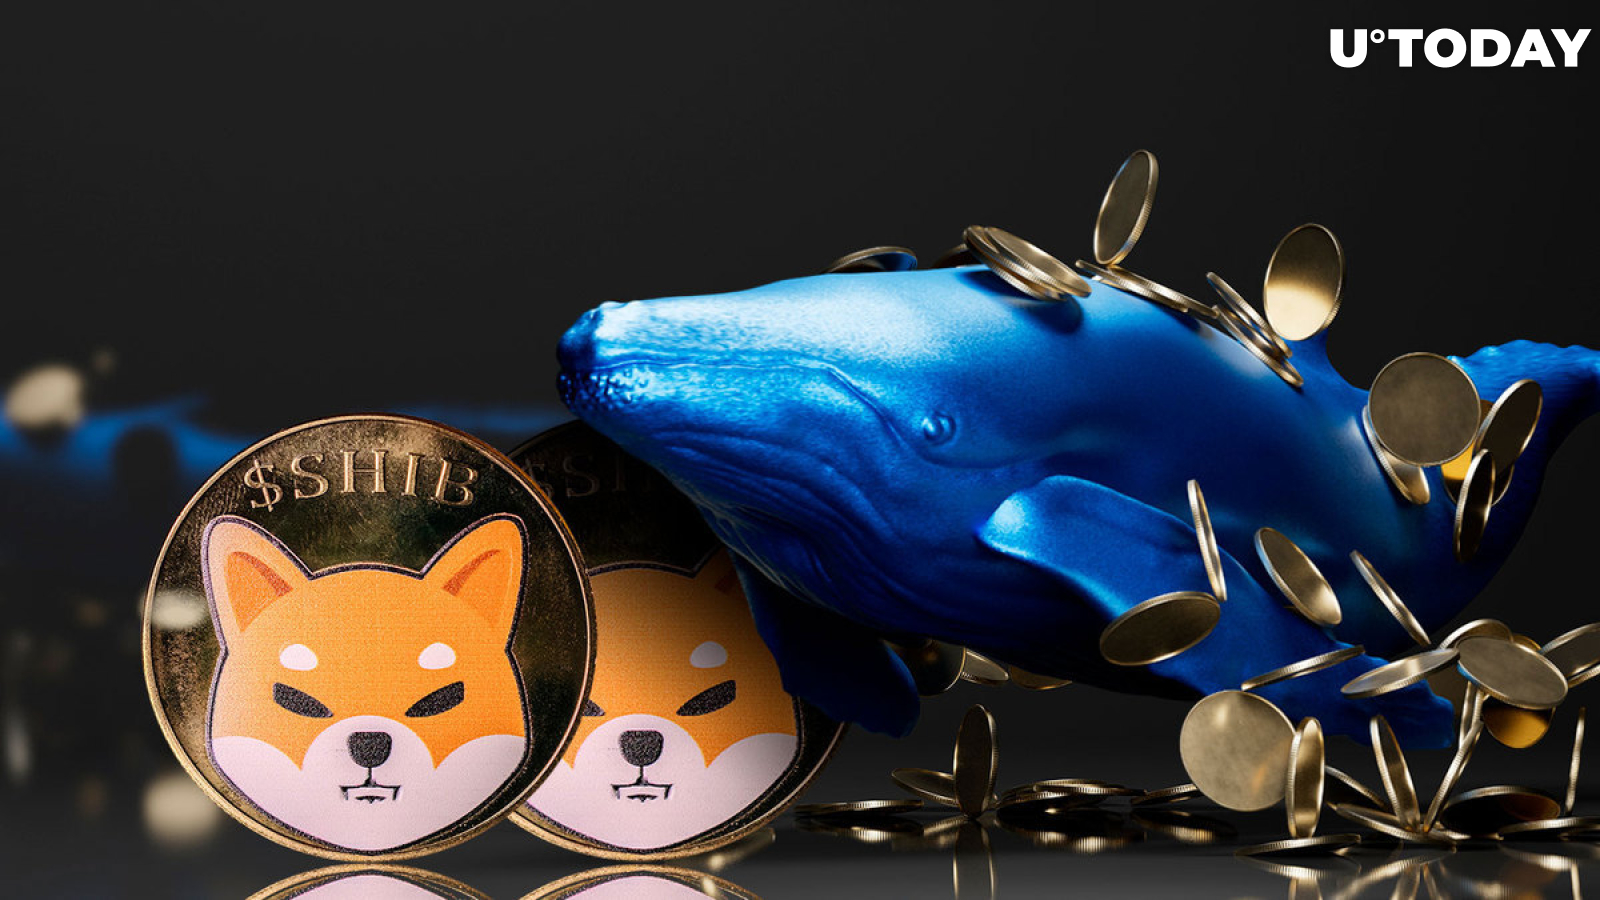 Dormant Ethereum (ETH) Whale Just Woke up and Bought Billions of Shiba Inu (SHIB)